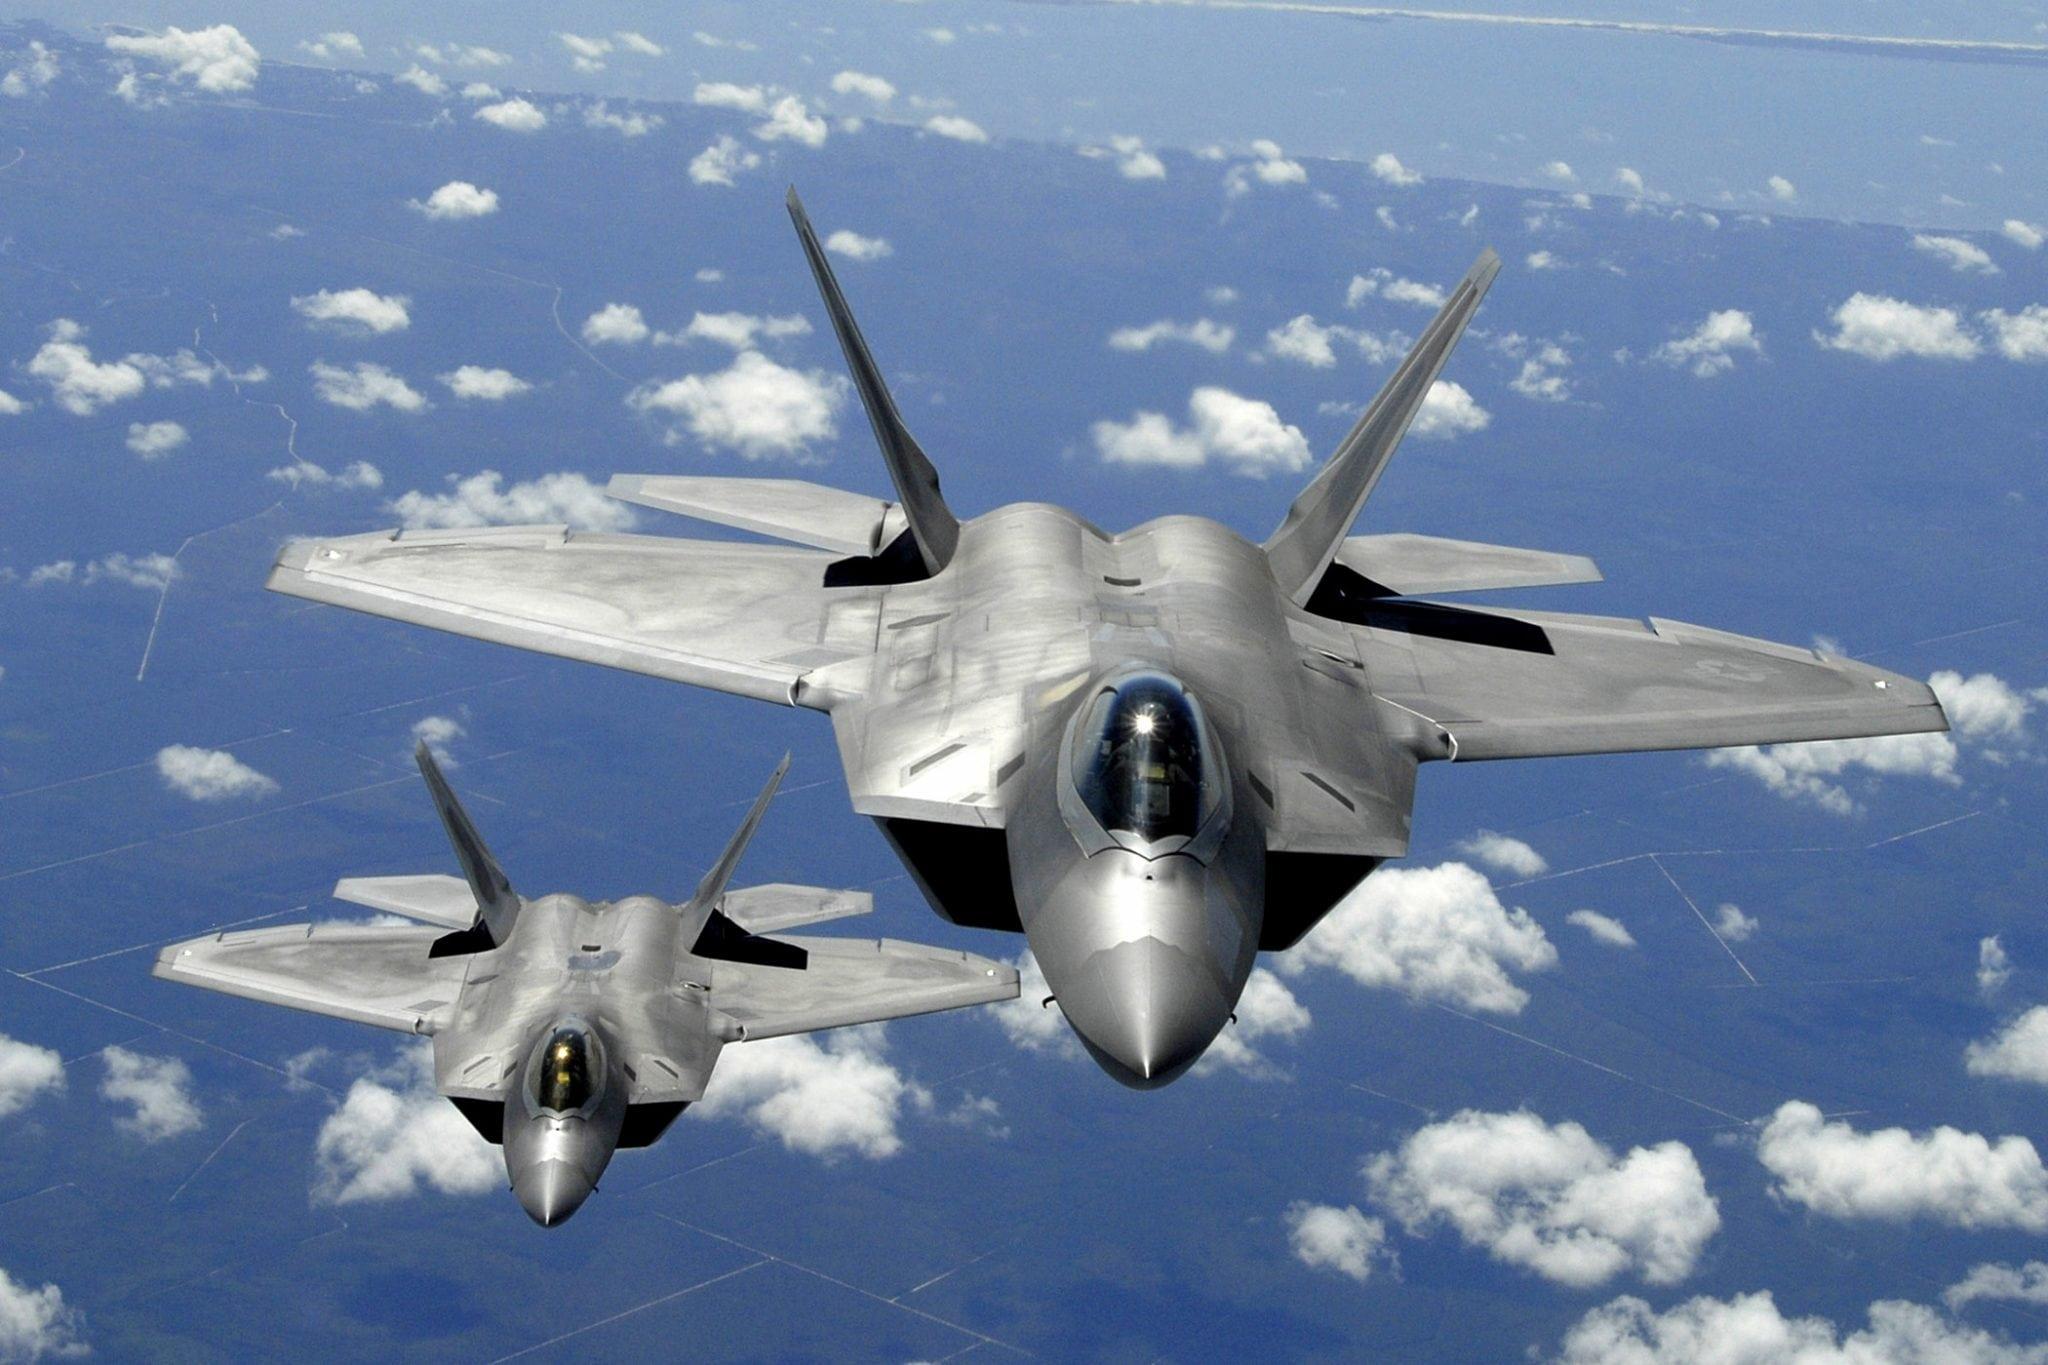 Remote Controlled F 22: Advantages of Remote-Controlled F-22s in Modern Warfare